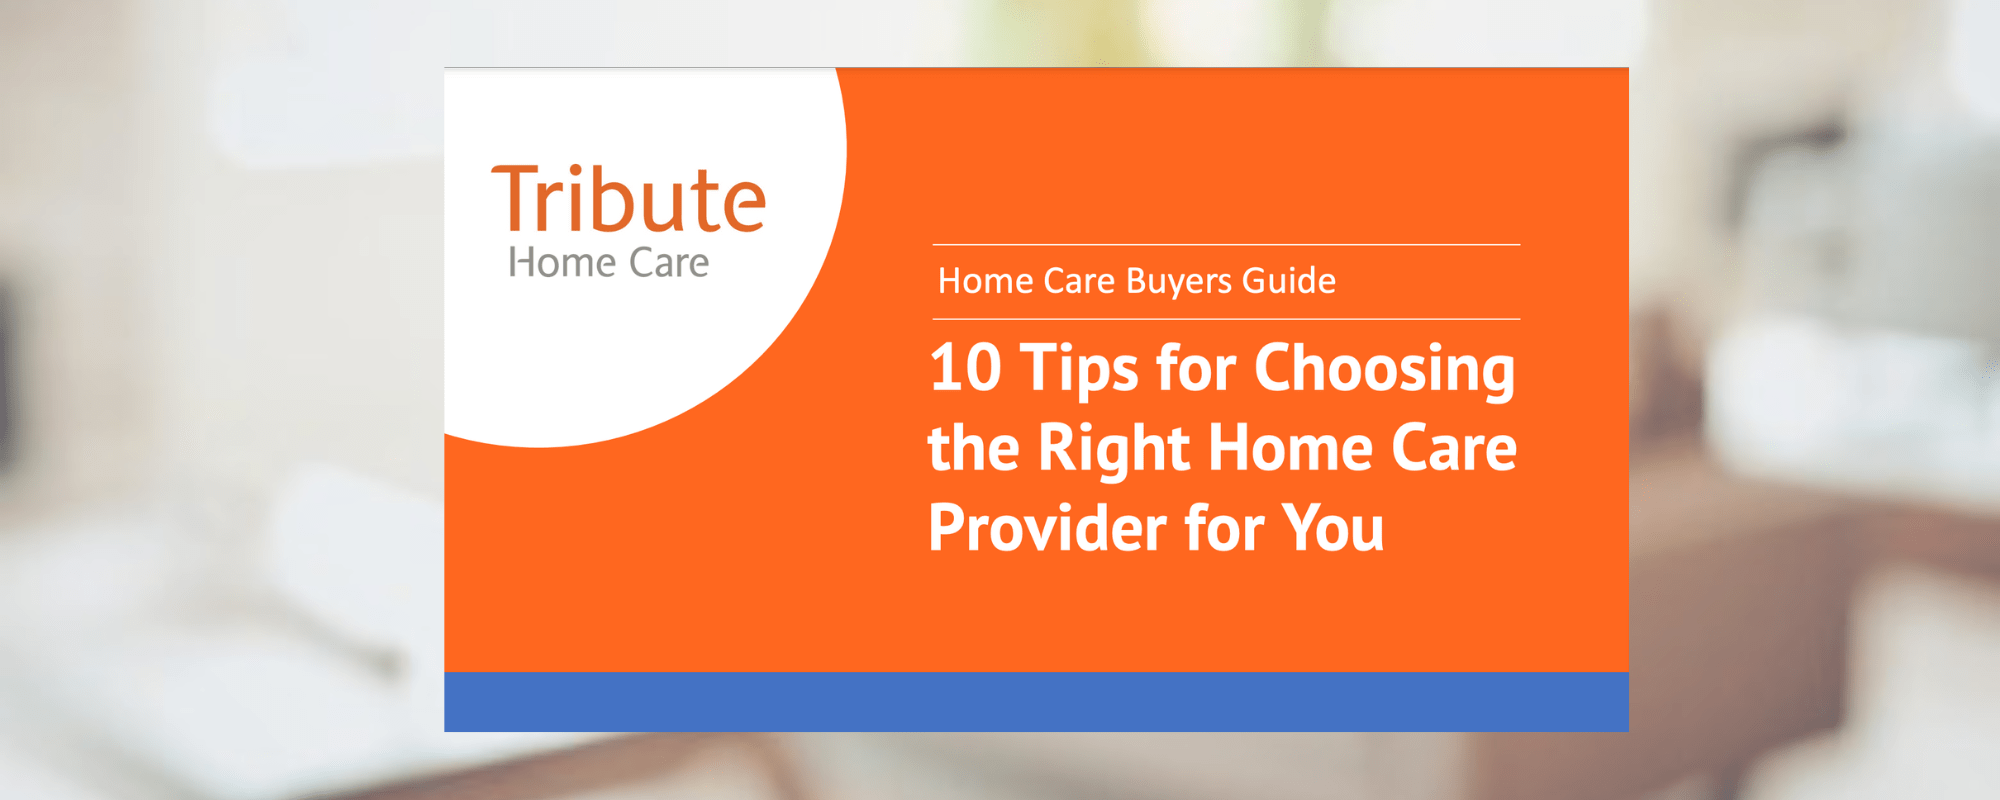 Free Home Care Buyers Guide for choosing right home care provider